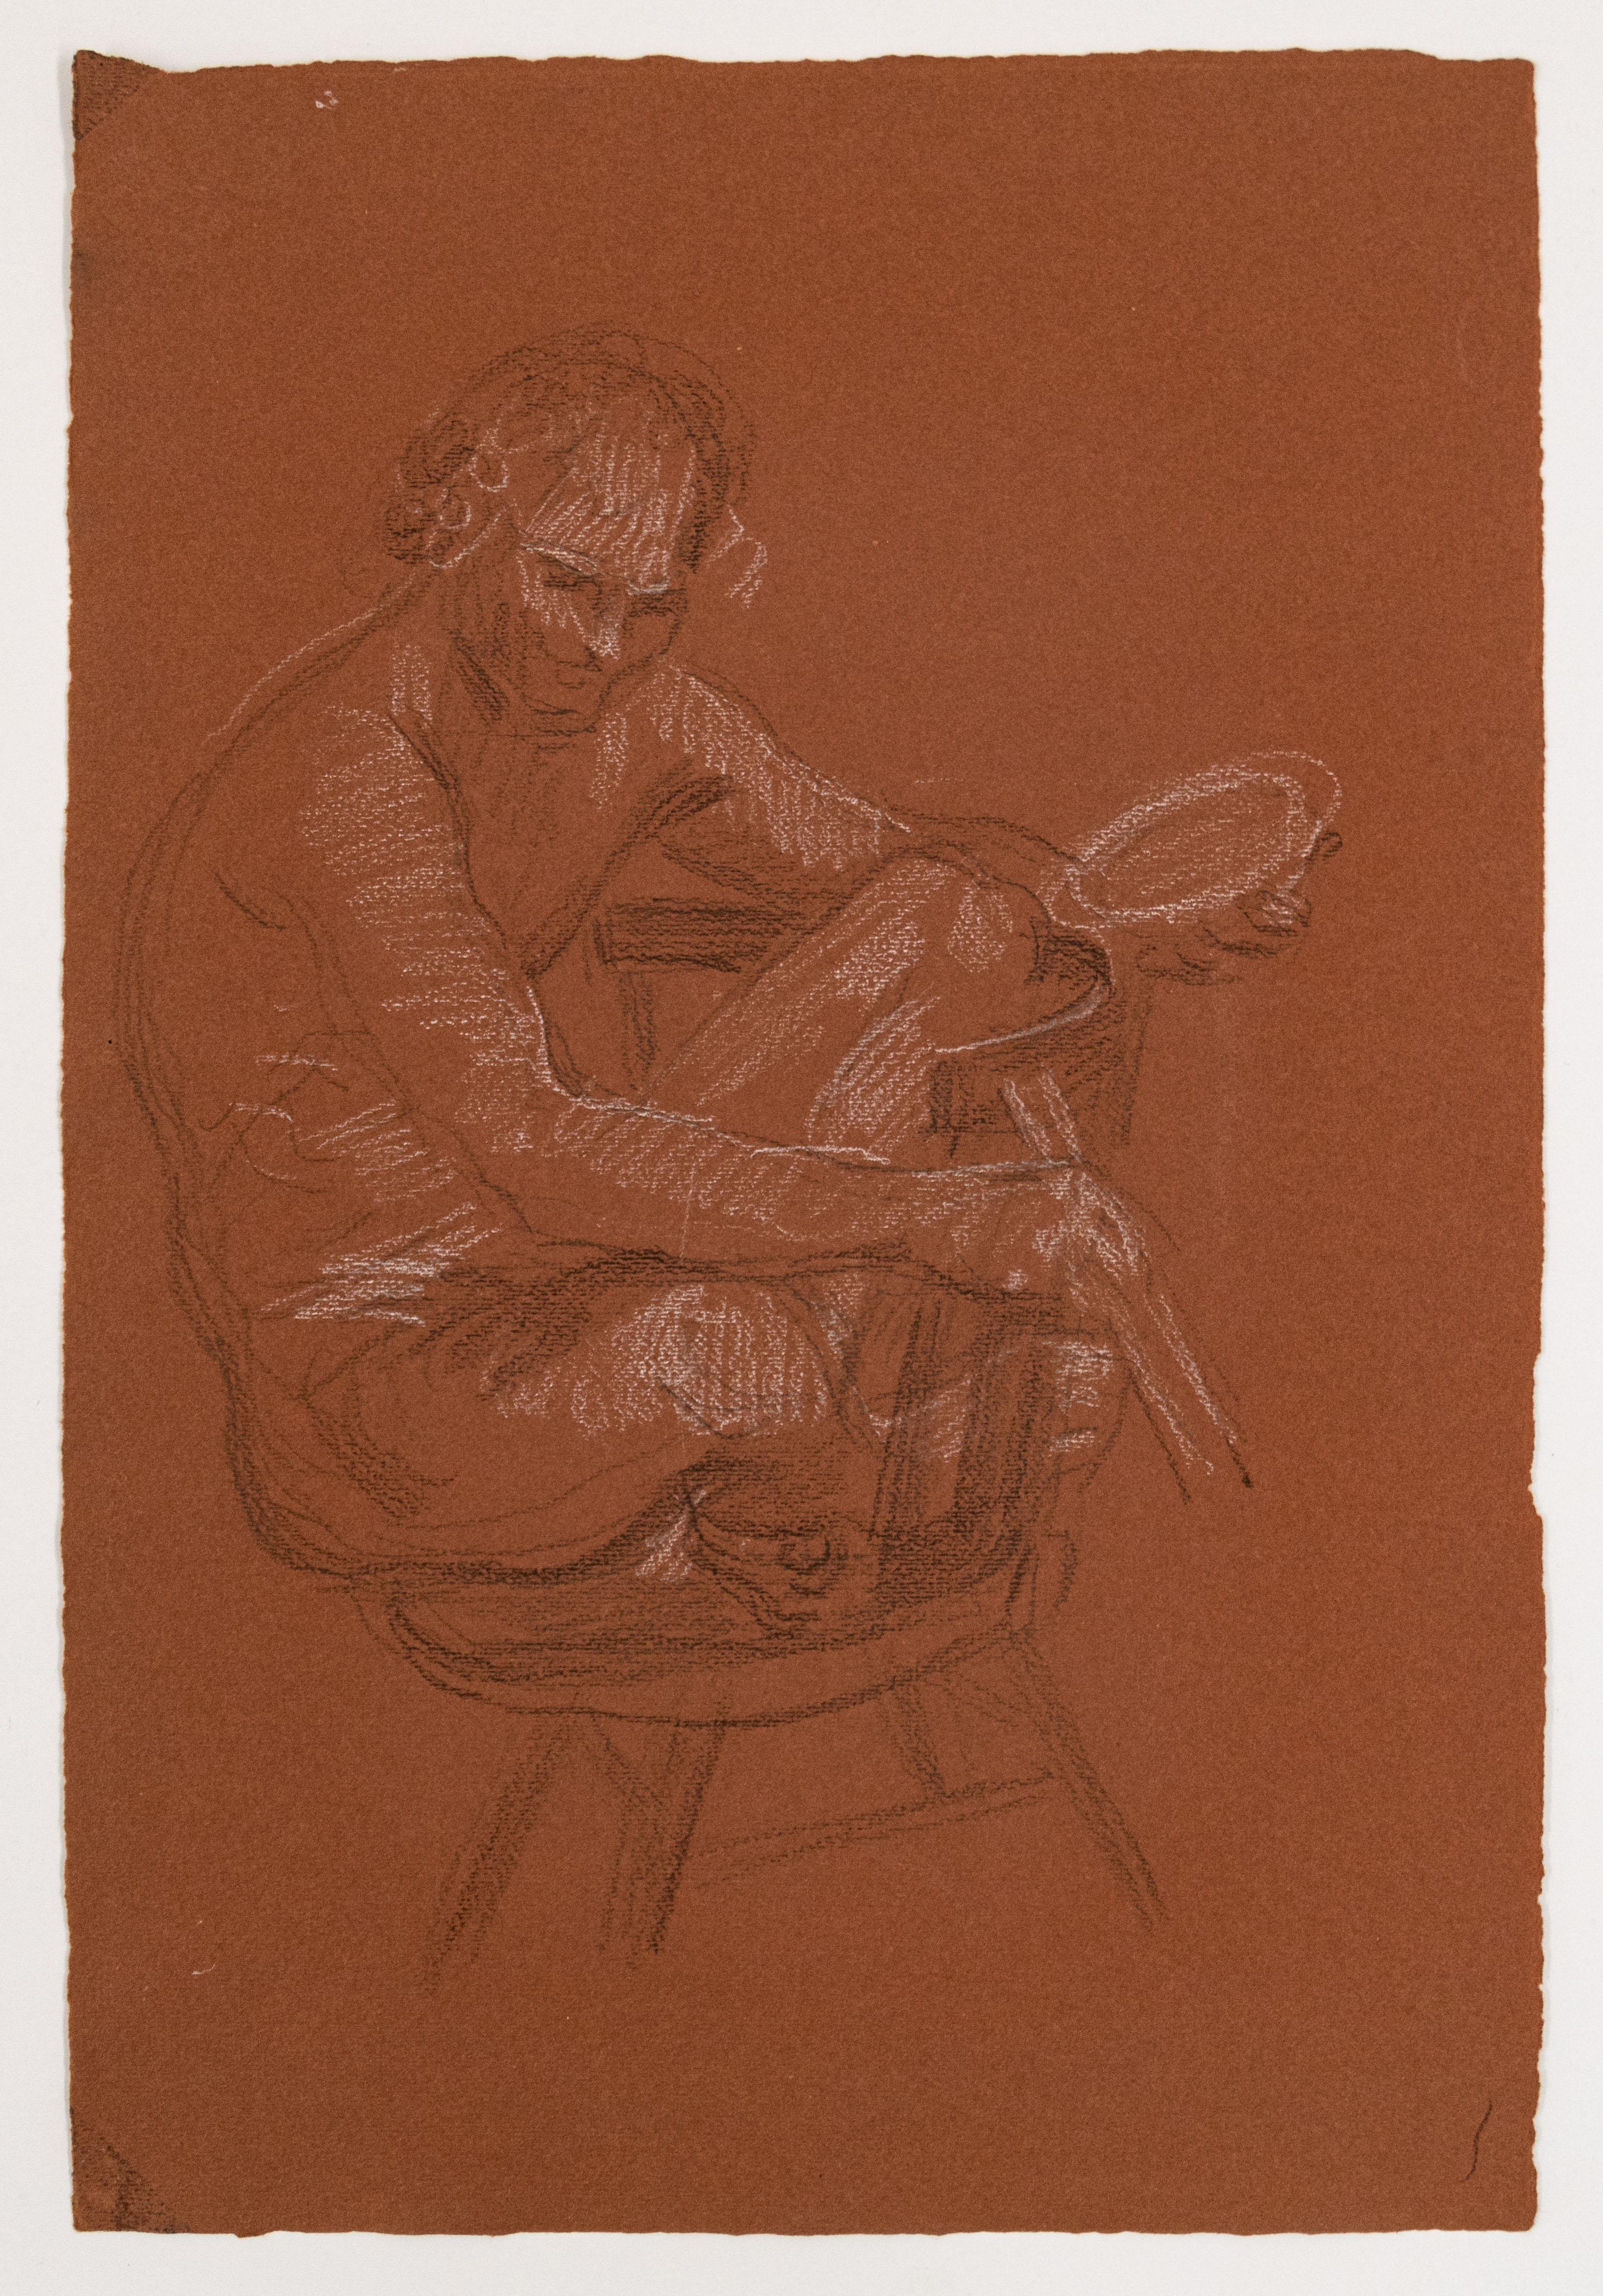 Painter Crouching on a Chair